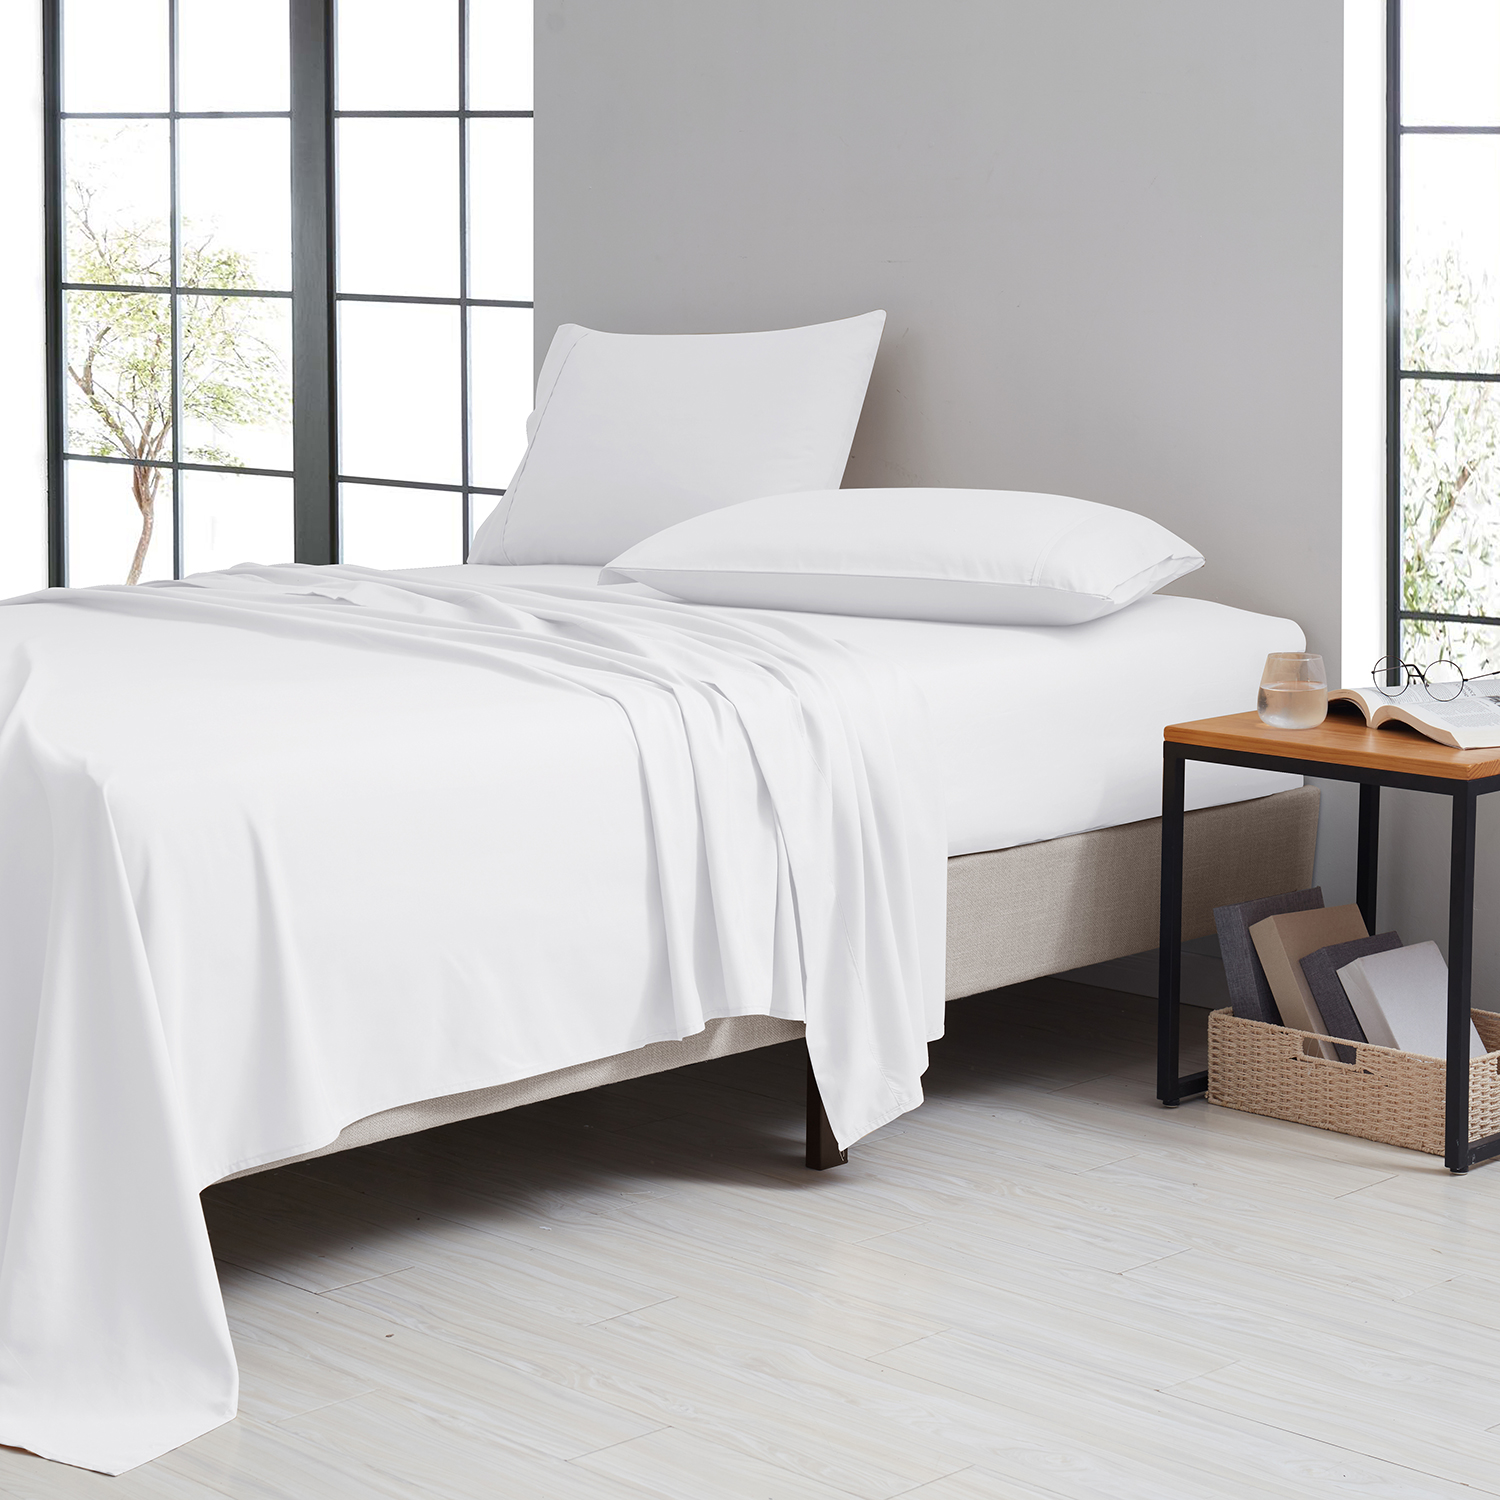 Bamboo Comfort  King Size Bamboo Luxury Solid Sheet Set, White - 4 Piece - image 1 of 21